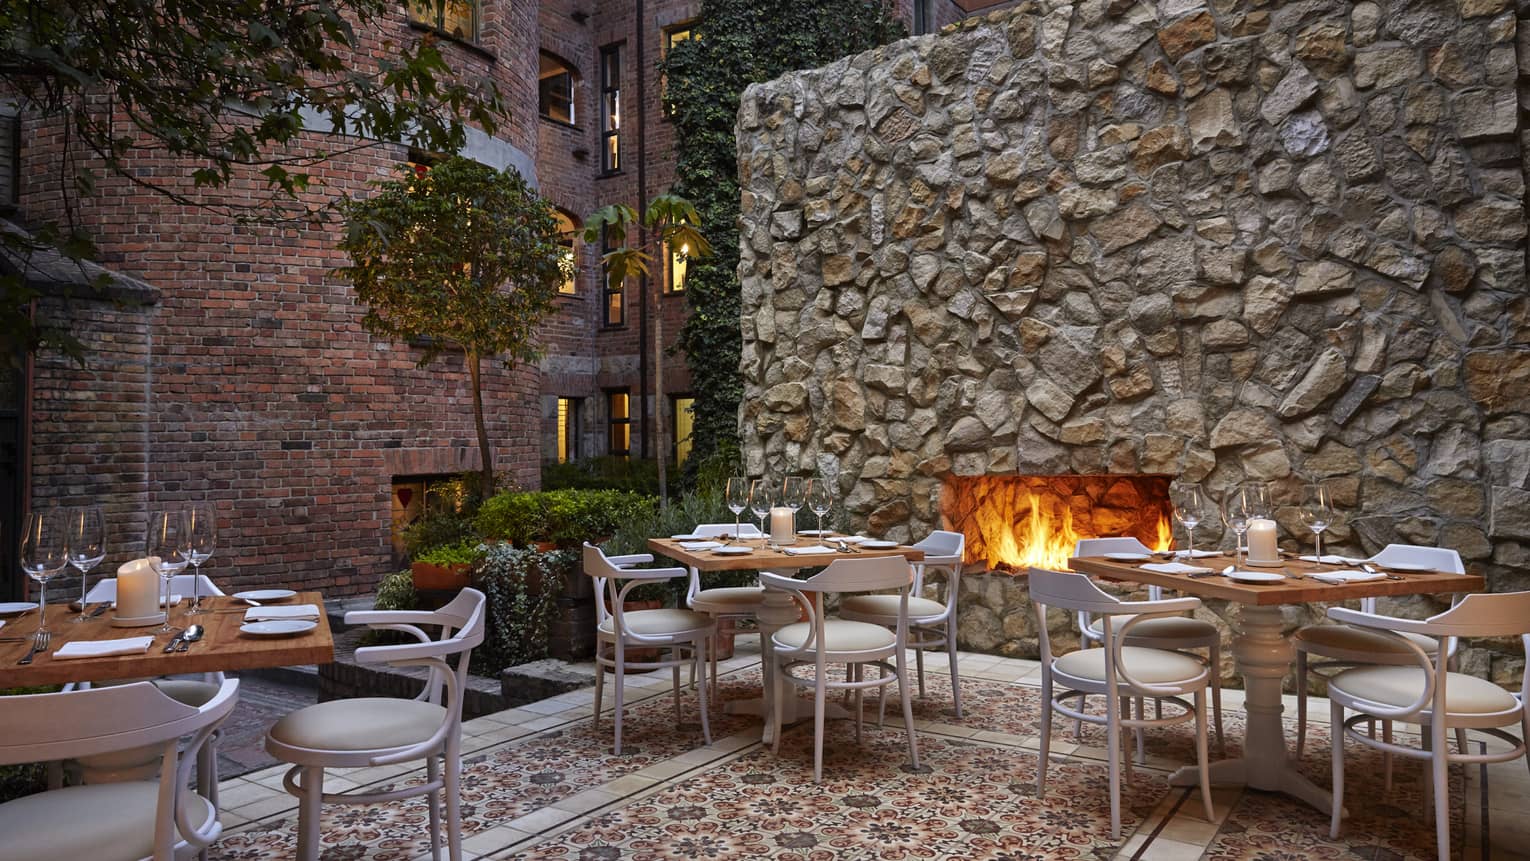 An outdoor patio with a fireplace, and several tables and chairs set up around.